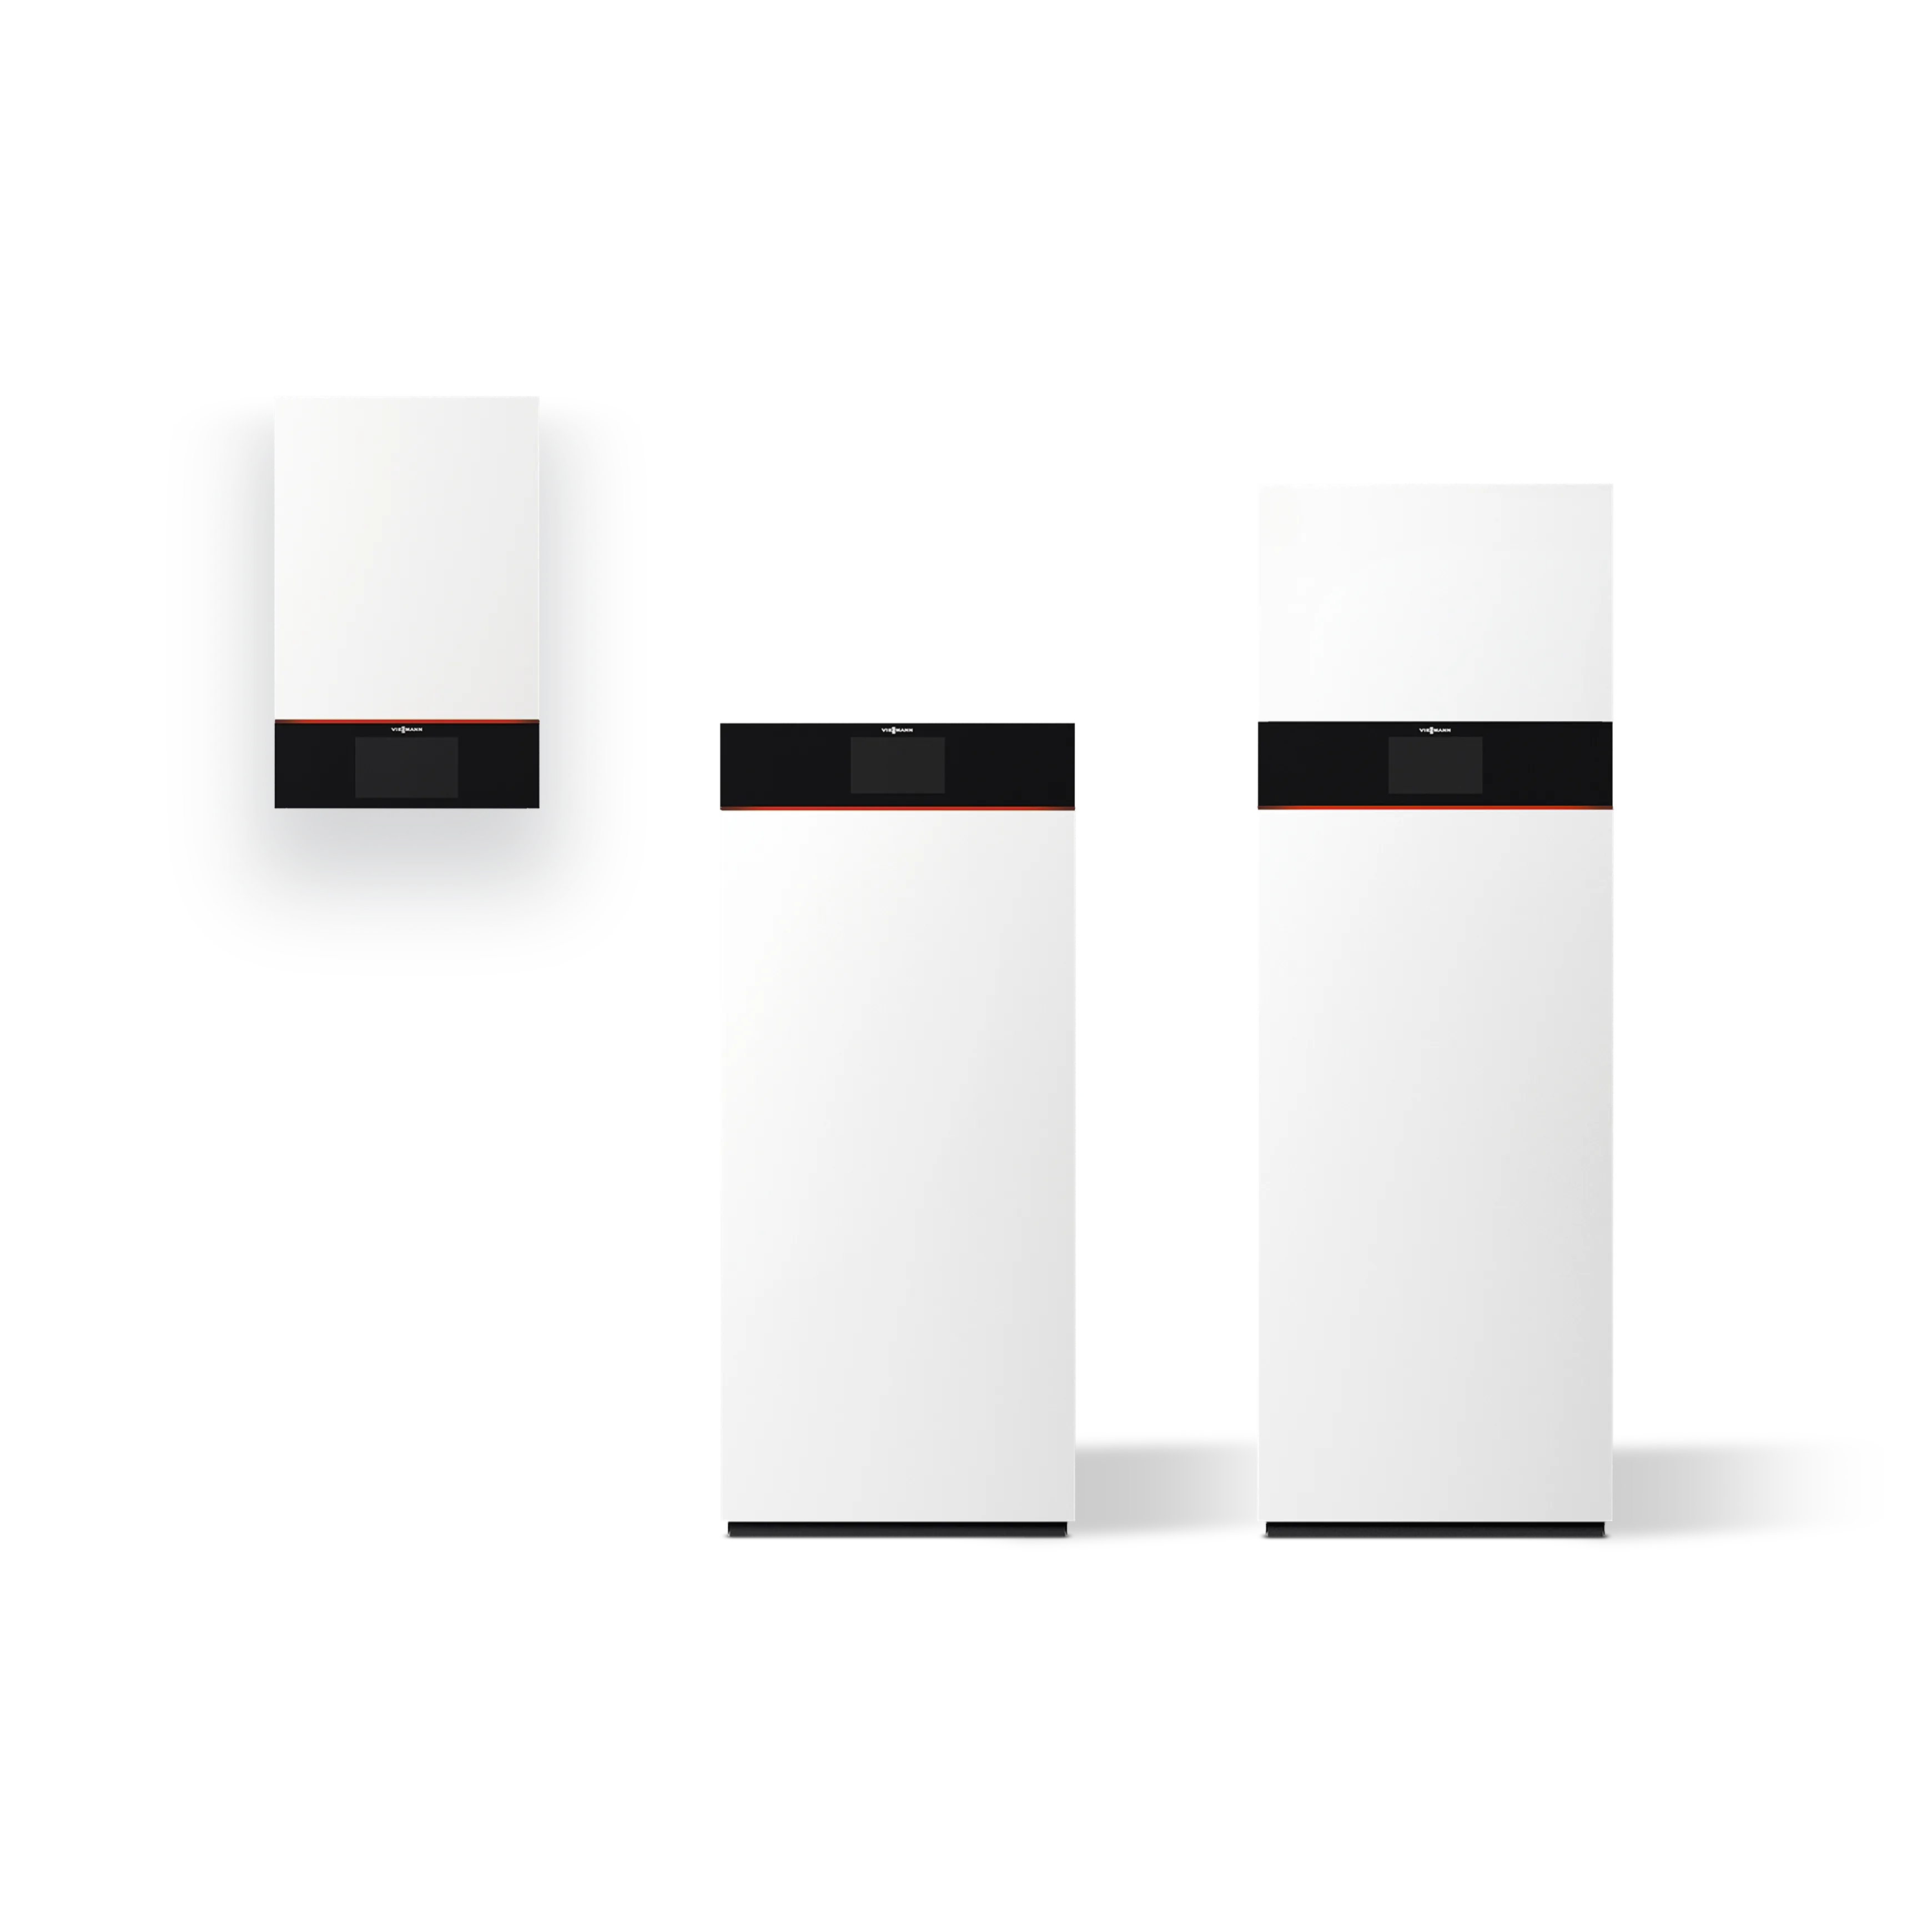 The Viessmann Vitodens product family in front of transparent background